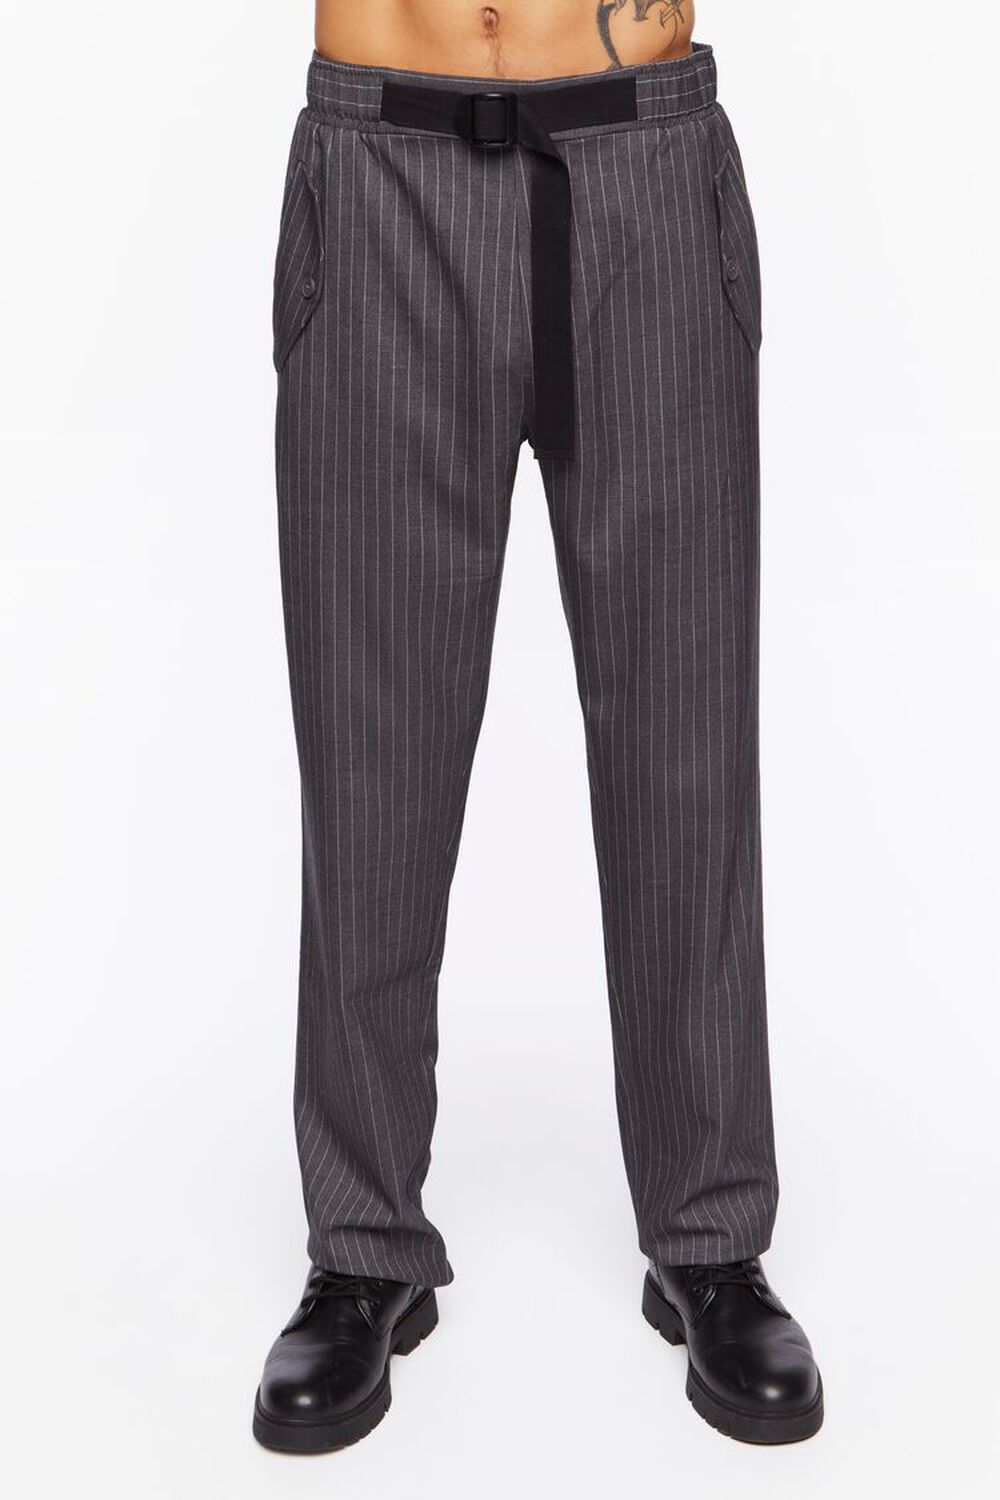 CHARCOAL/WHITE Pinstriped Belted Trousers, image 2